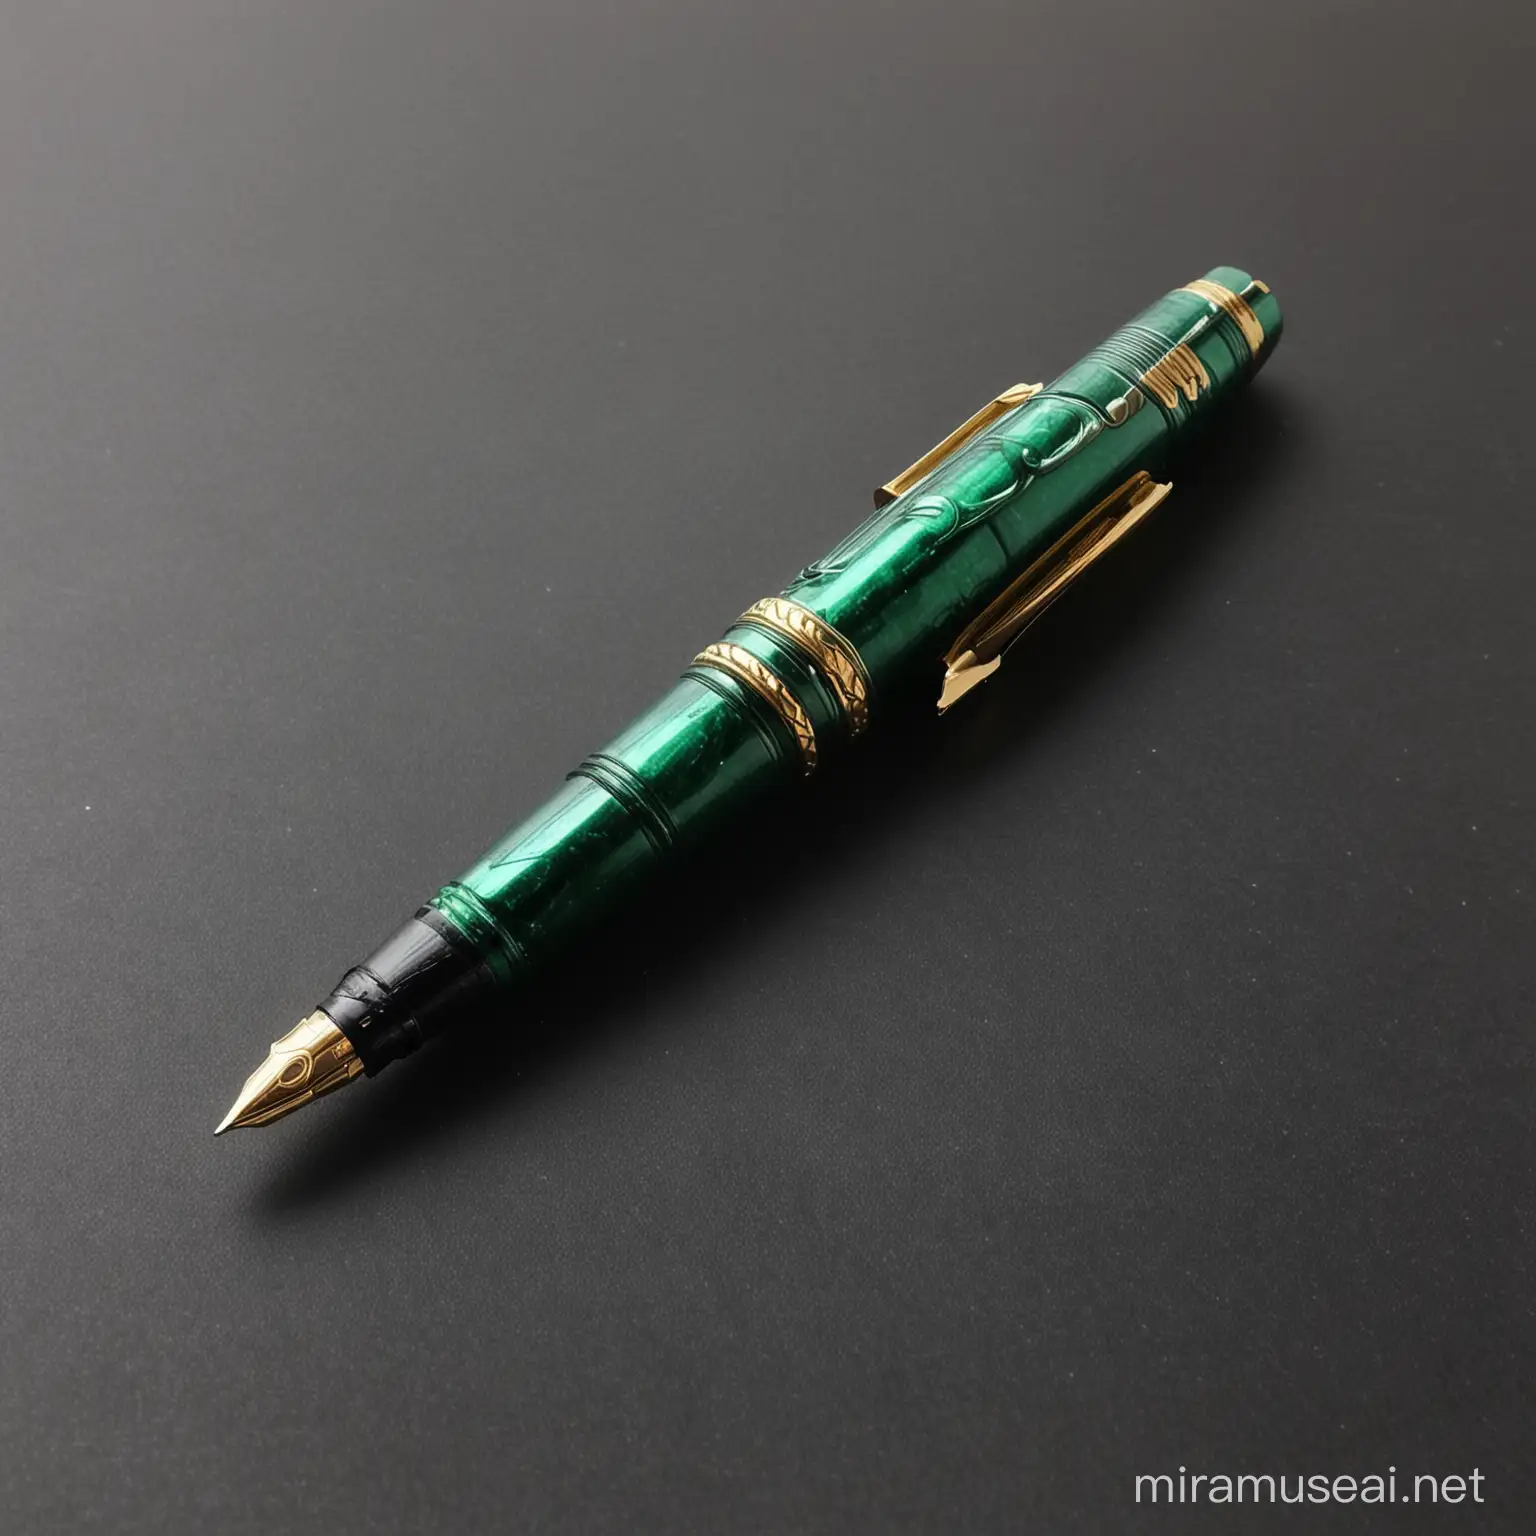 Elegant Green Lantern Style Fountain Pen Exquisite Writing Instrument for Discerning Collectors